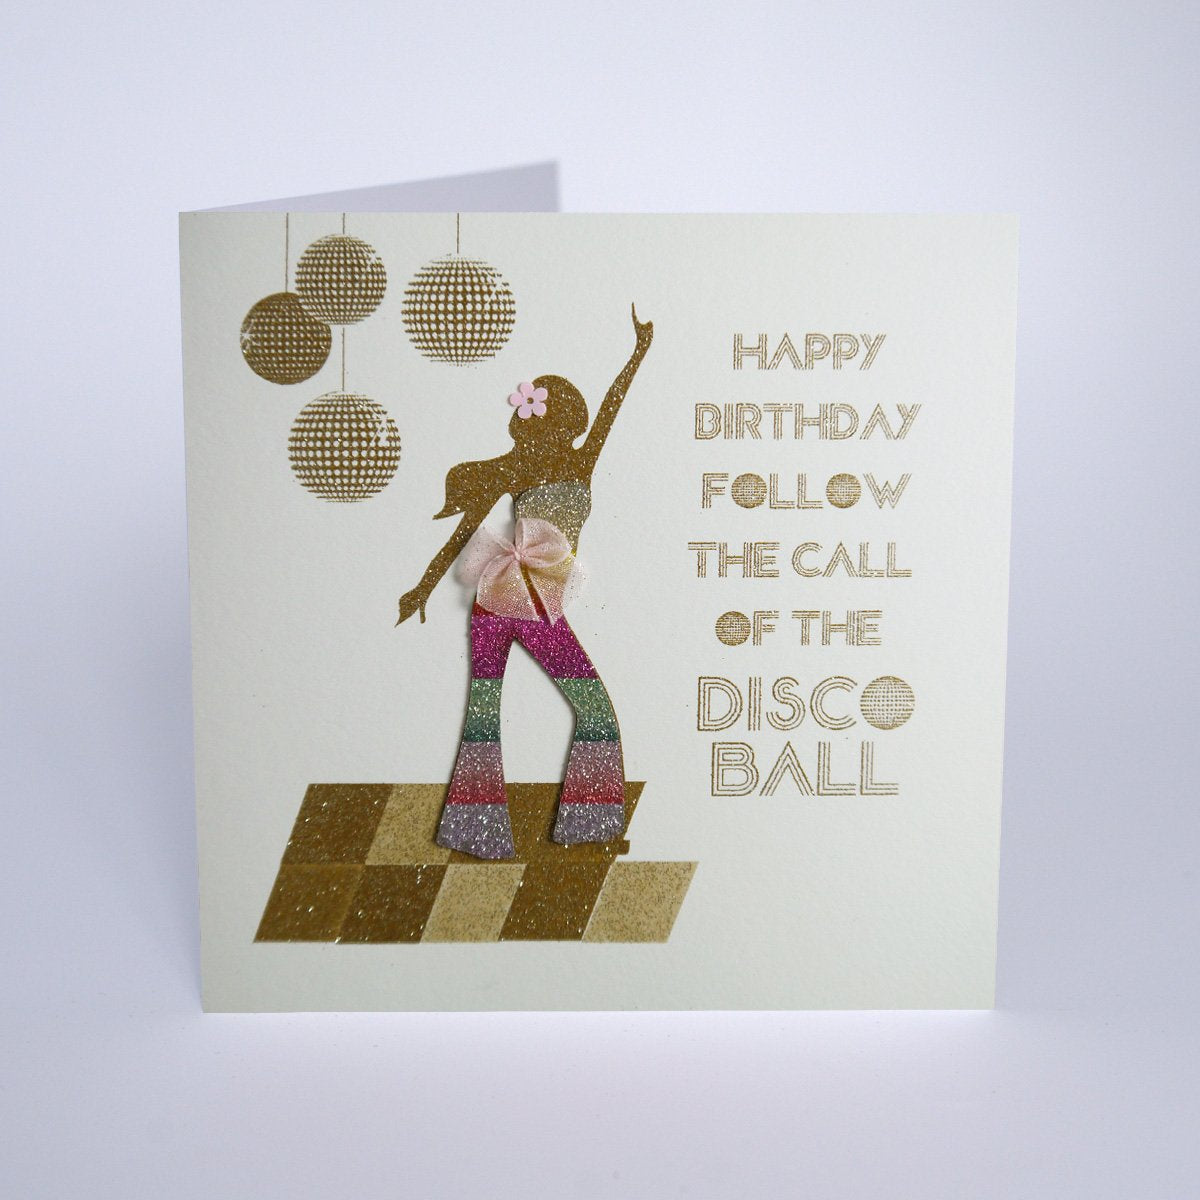 Five Dollar Shake Follow the Call of the Discoball Birthday Card